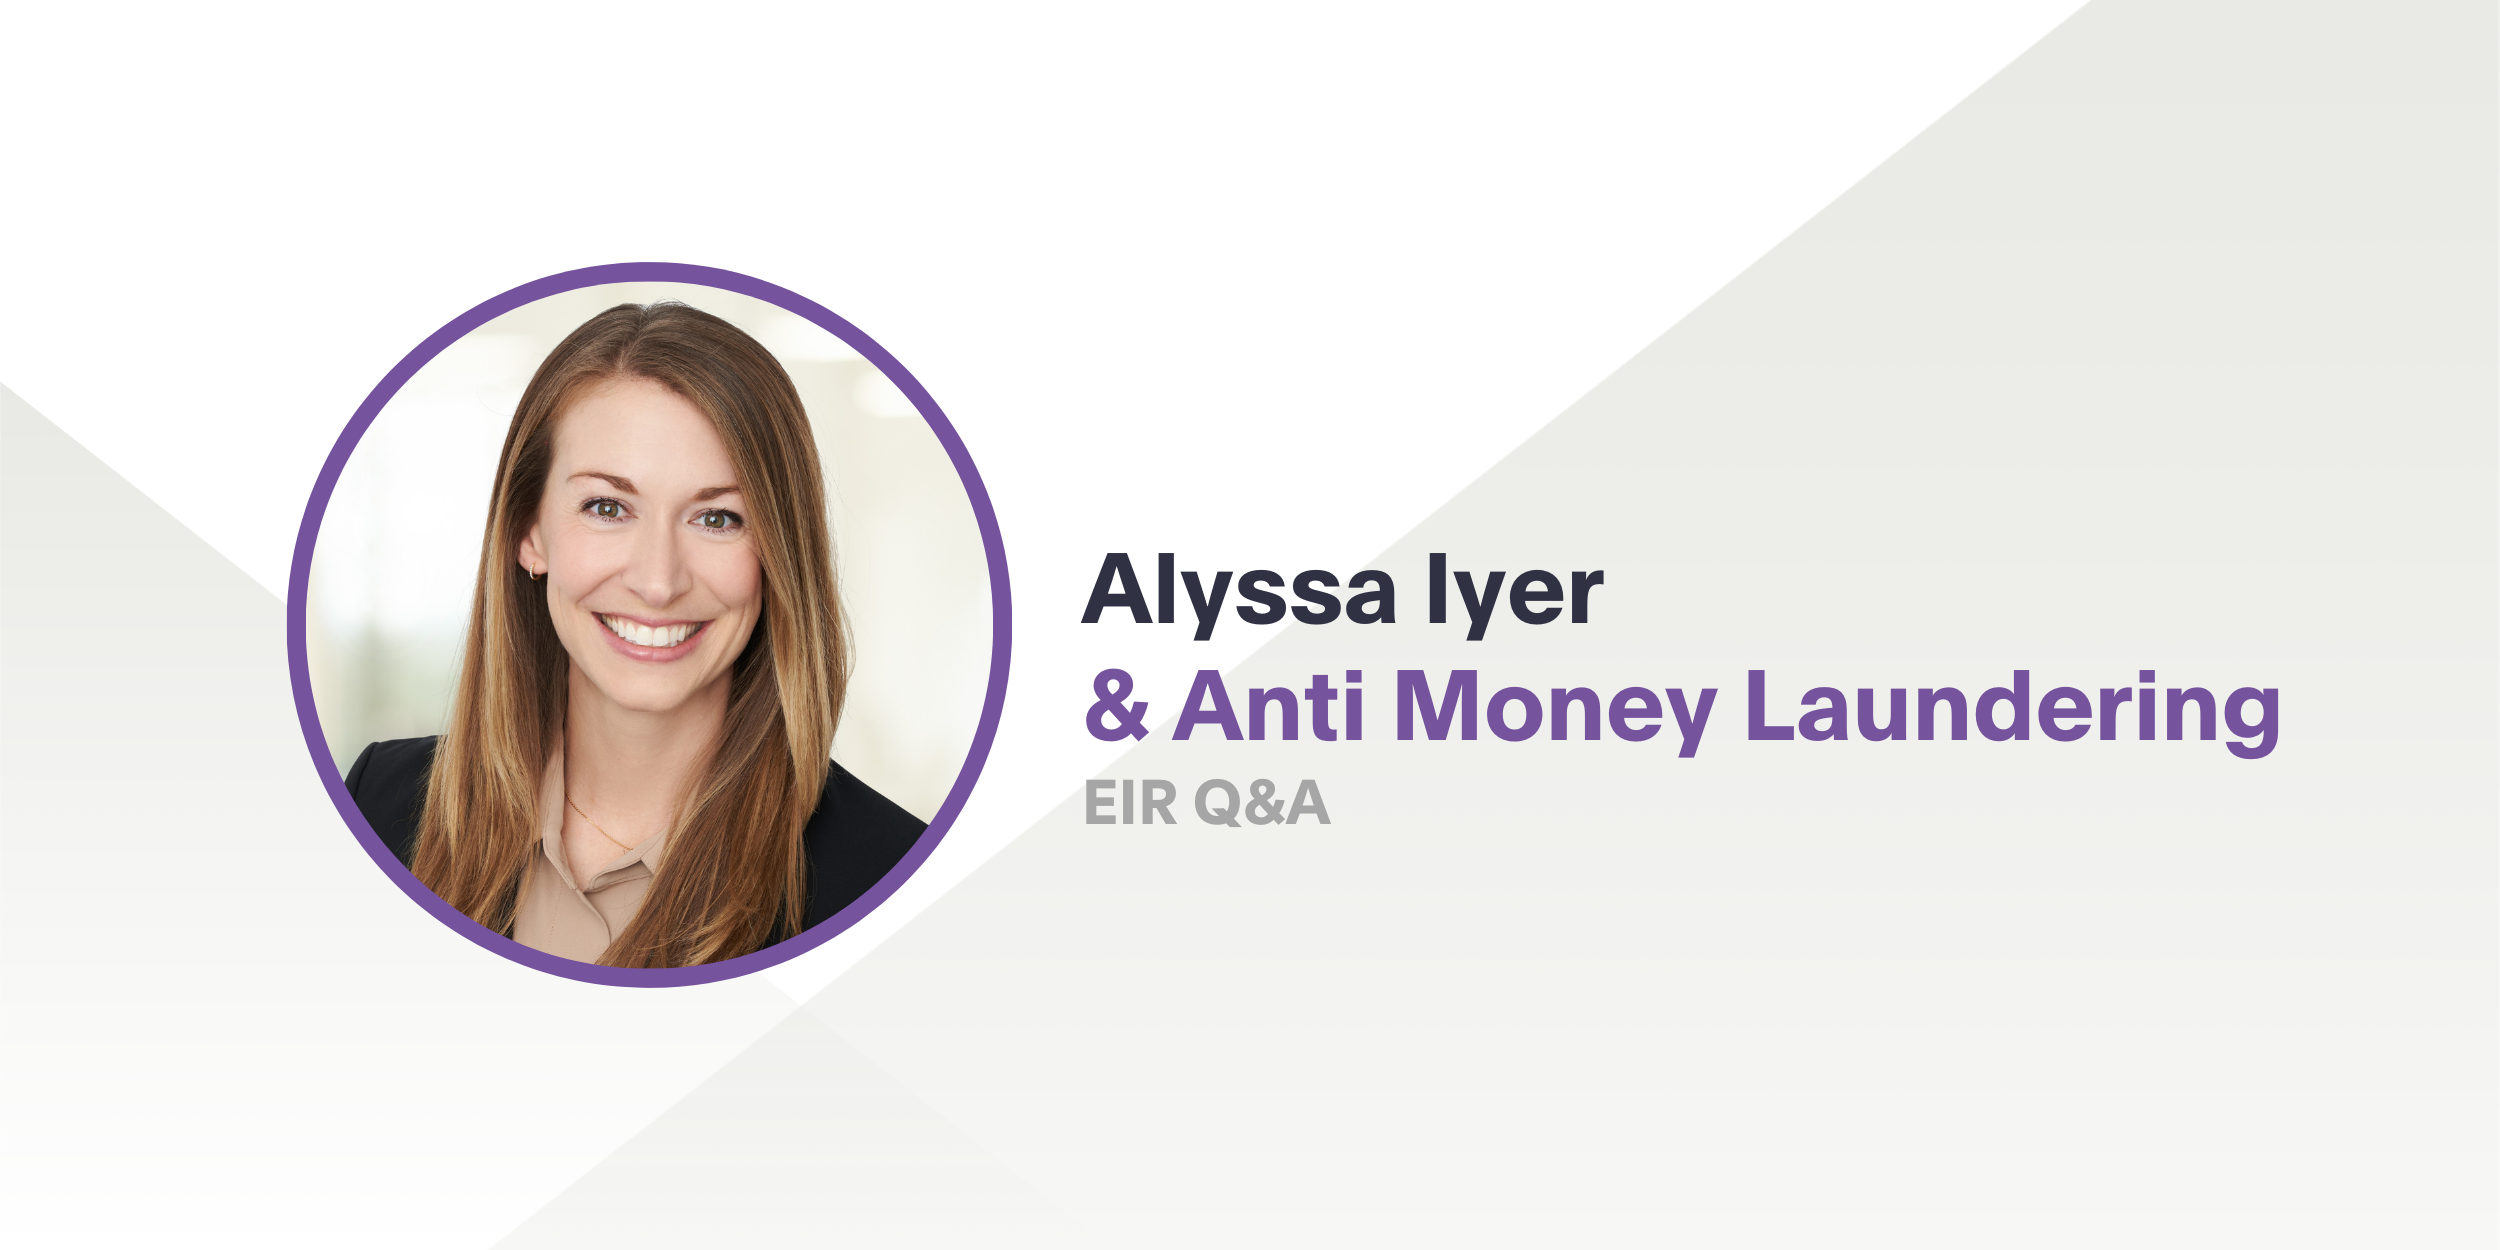 Q&A with Alyssa Iyer on Fighting Financial Crime through Tech-enabled Solutions